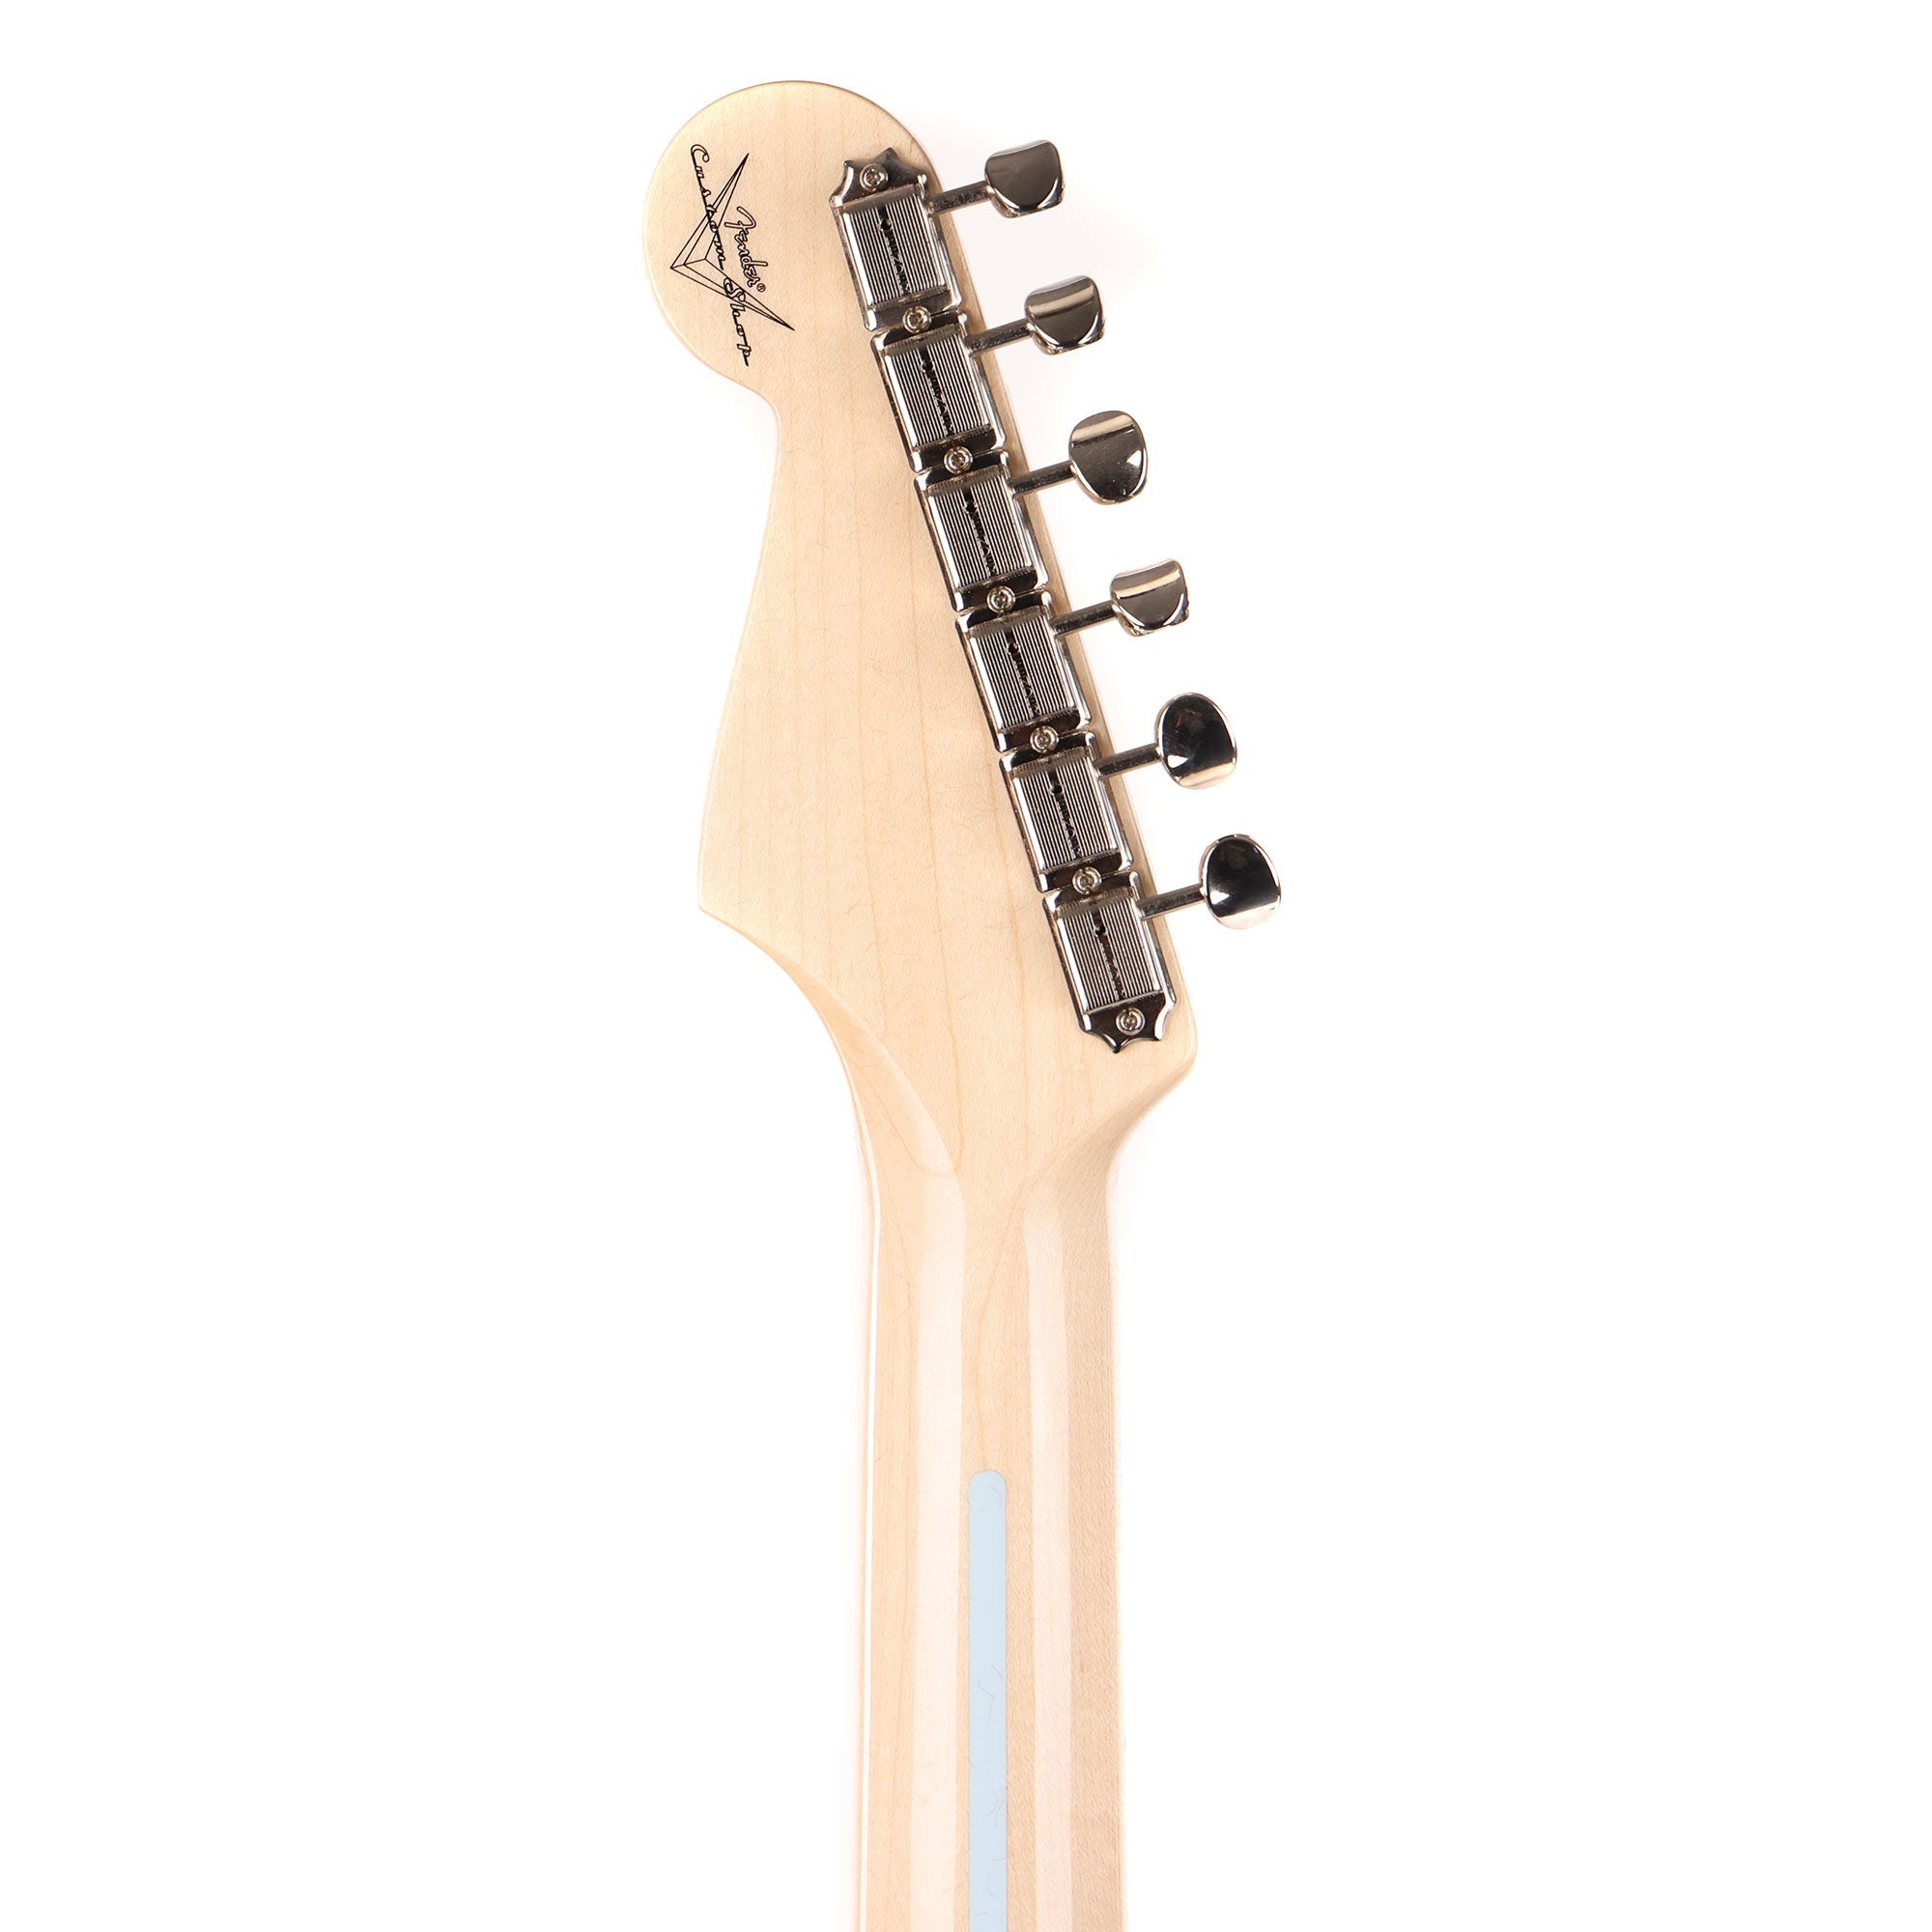 Colour match for Classic Vibe neck?